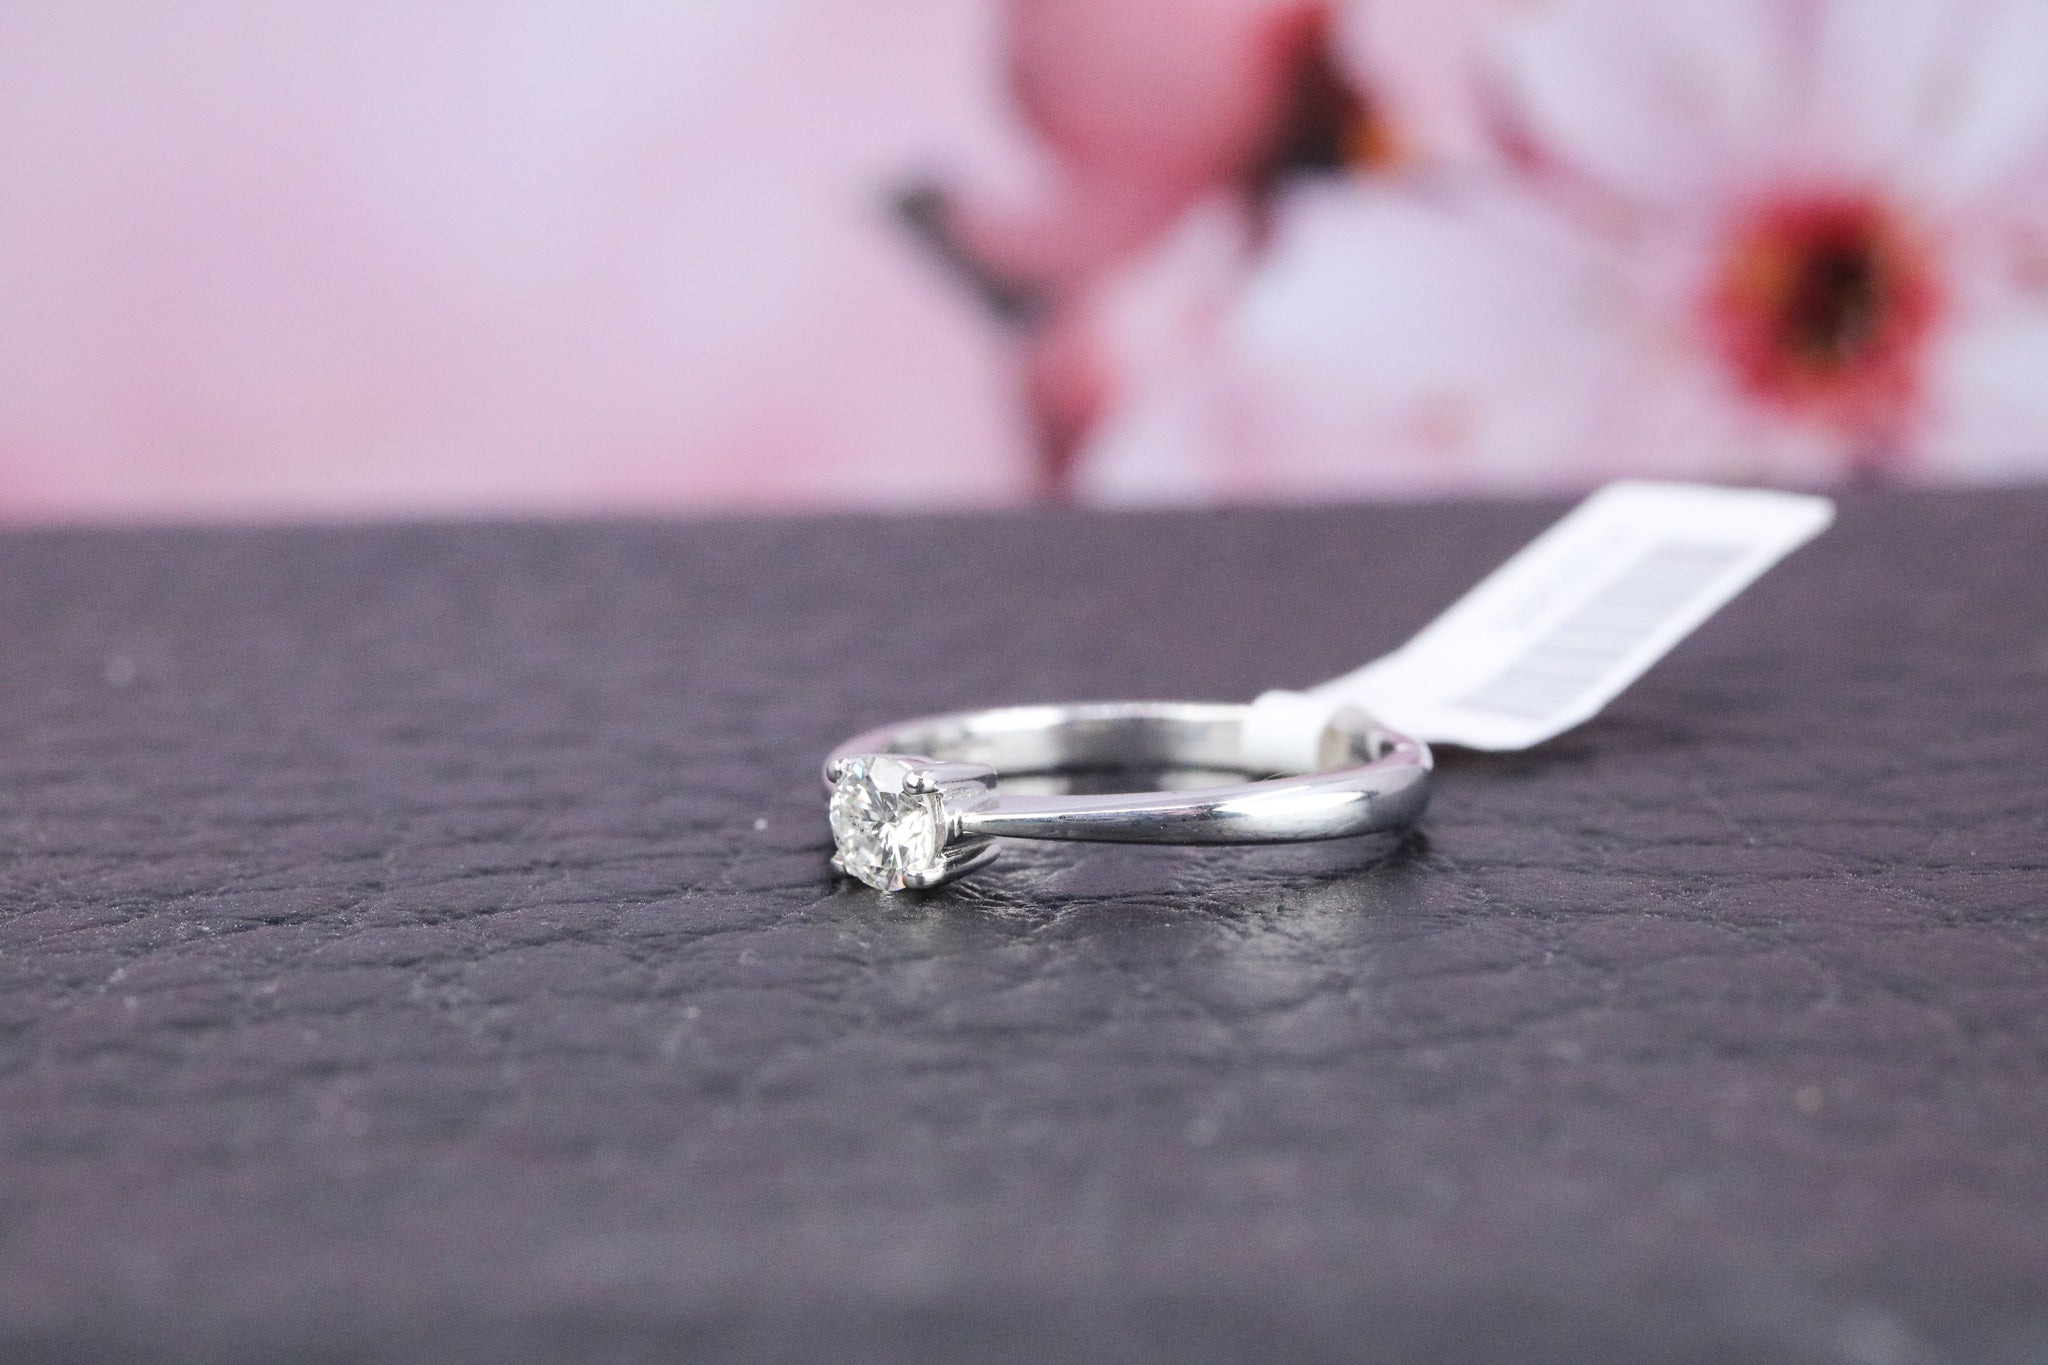 9ct White Gold Diamond Ring - HJ2285 - Hallmark Jewellers Formby & The Jewellers Bench Widnes